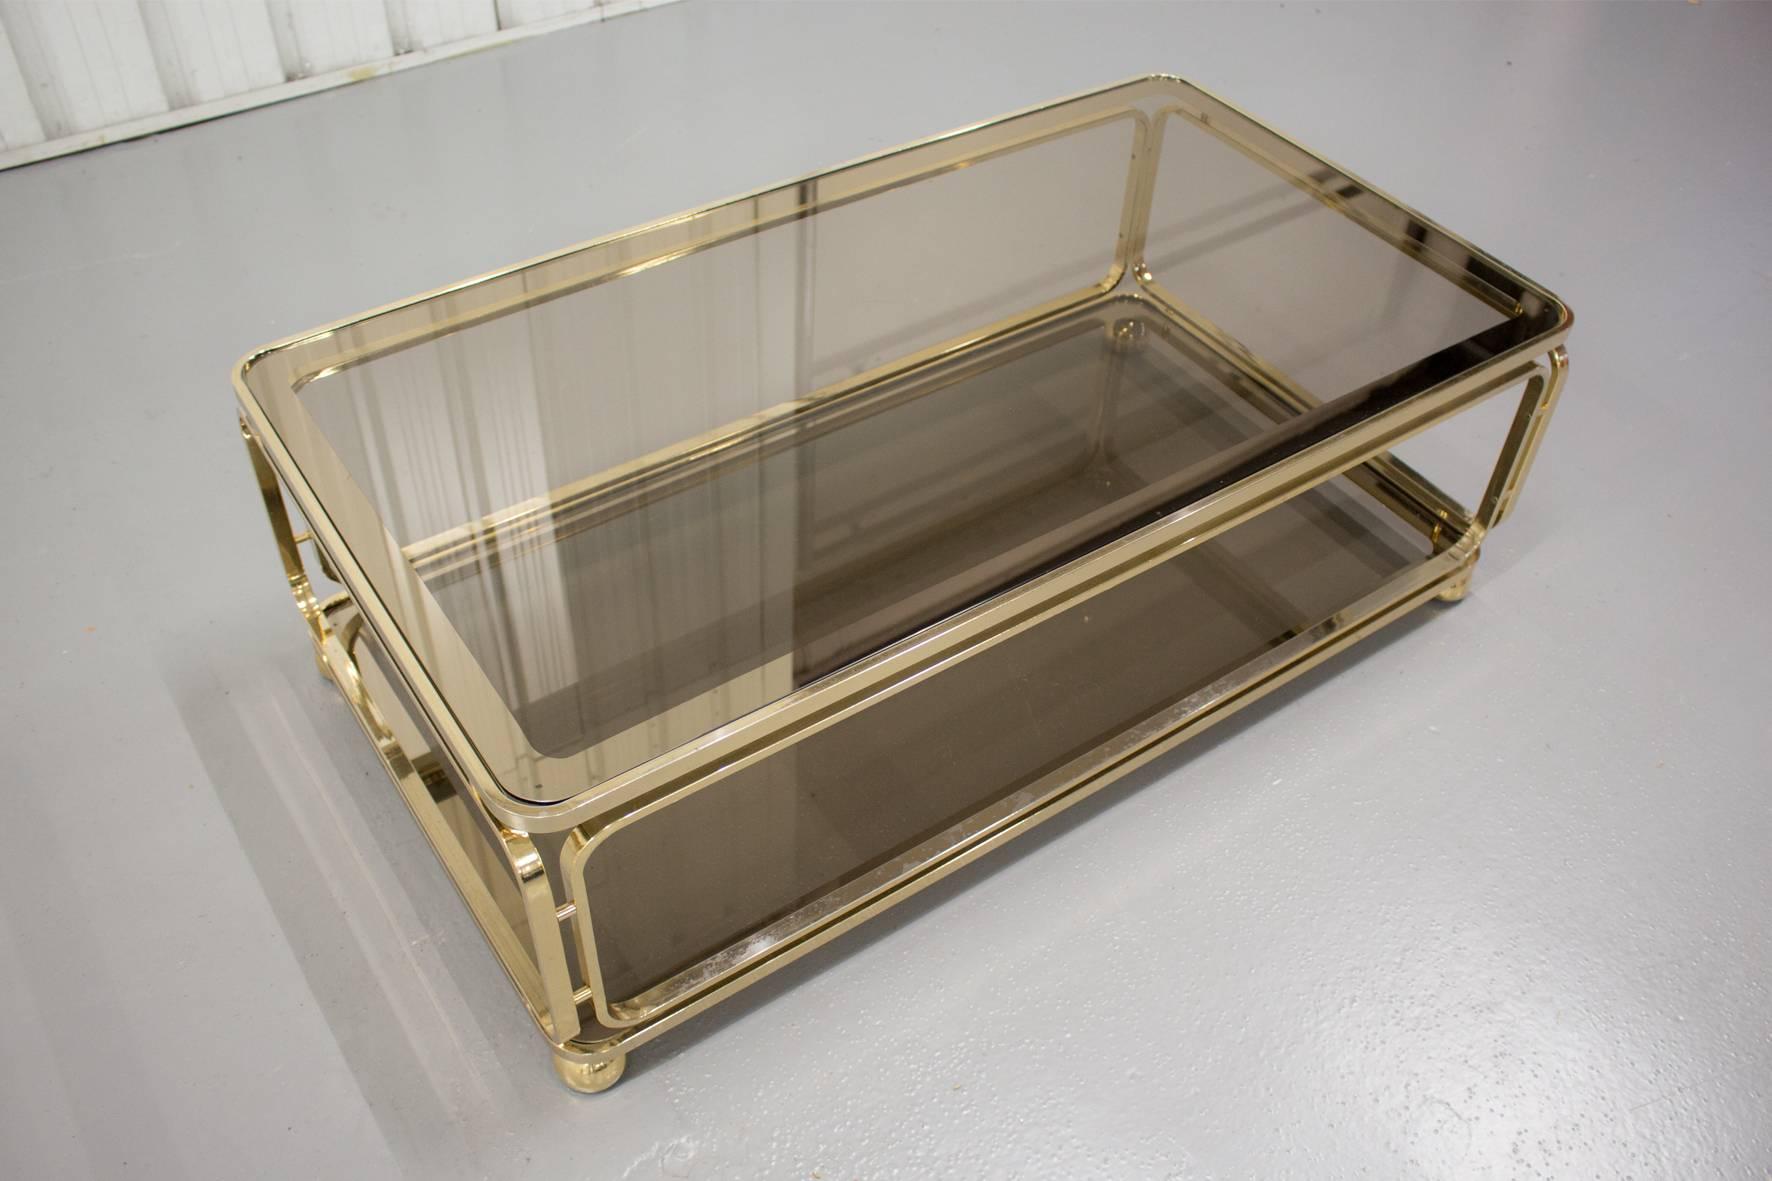 A beautiful Regency-style coffee table with two tiers made of smoked glass with a mirrored edge. Underneath the messing frame are 4 easily adjustable wheels to move the table in a comfortable manner. 

The frame has a little wear and a few minor